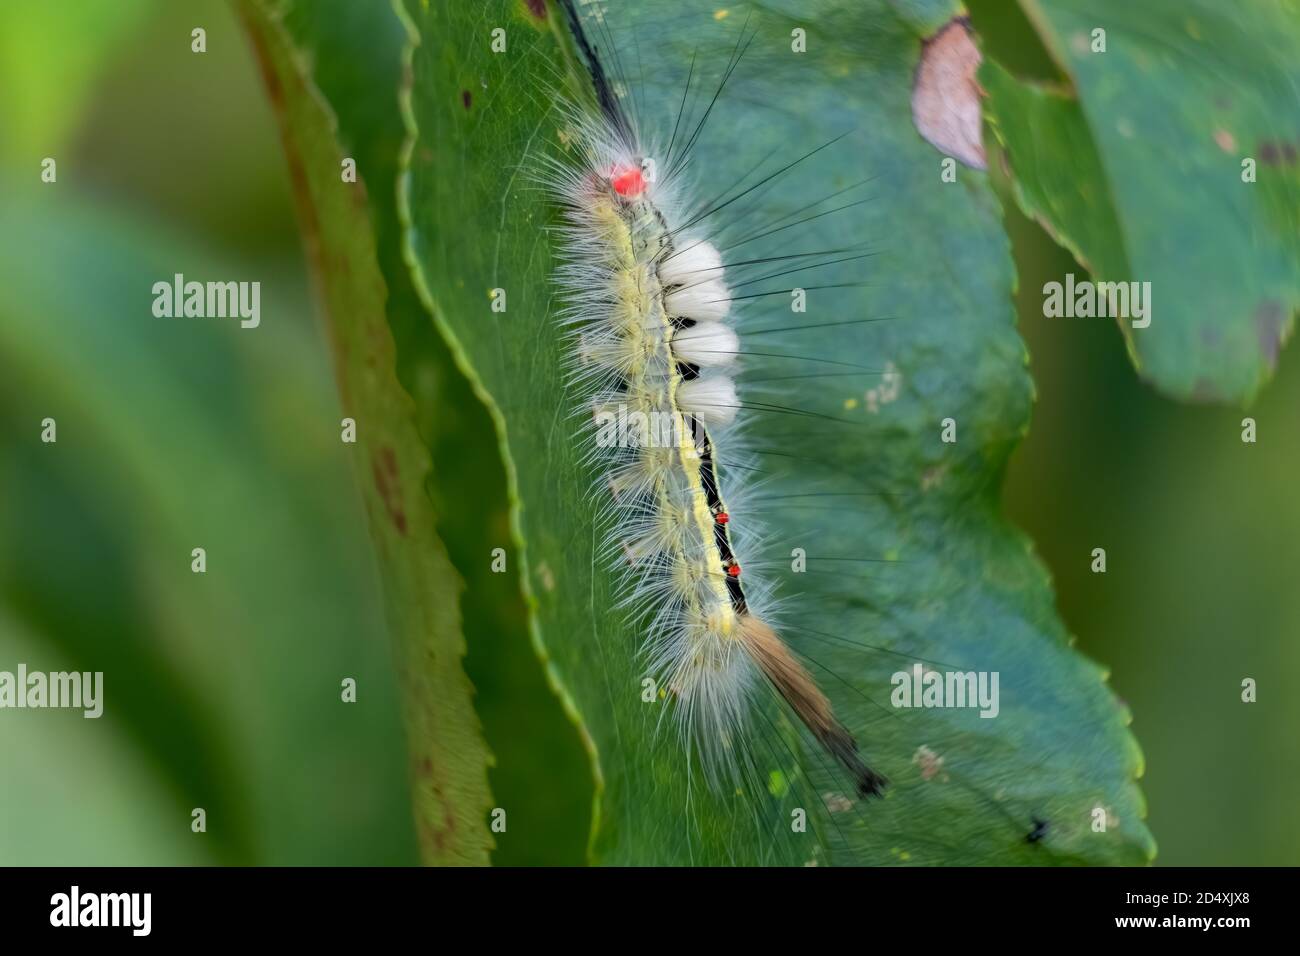 This beautiful White-marked Tussock Moth (Orgyia Leucostigma) looks soft and fuzzy, but it can excreted venom through its spines. Stock Photo